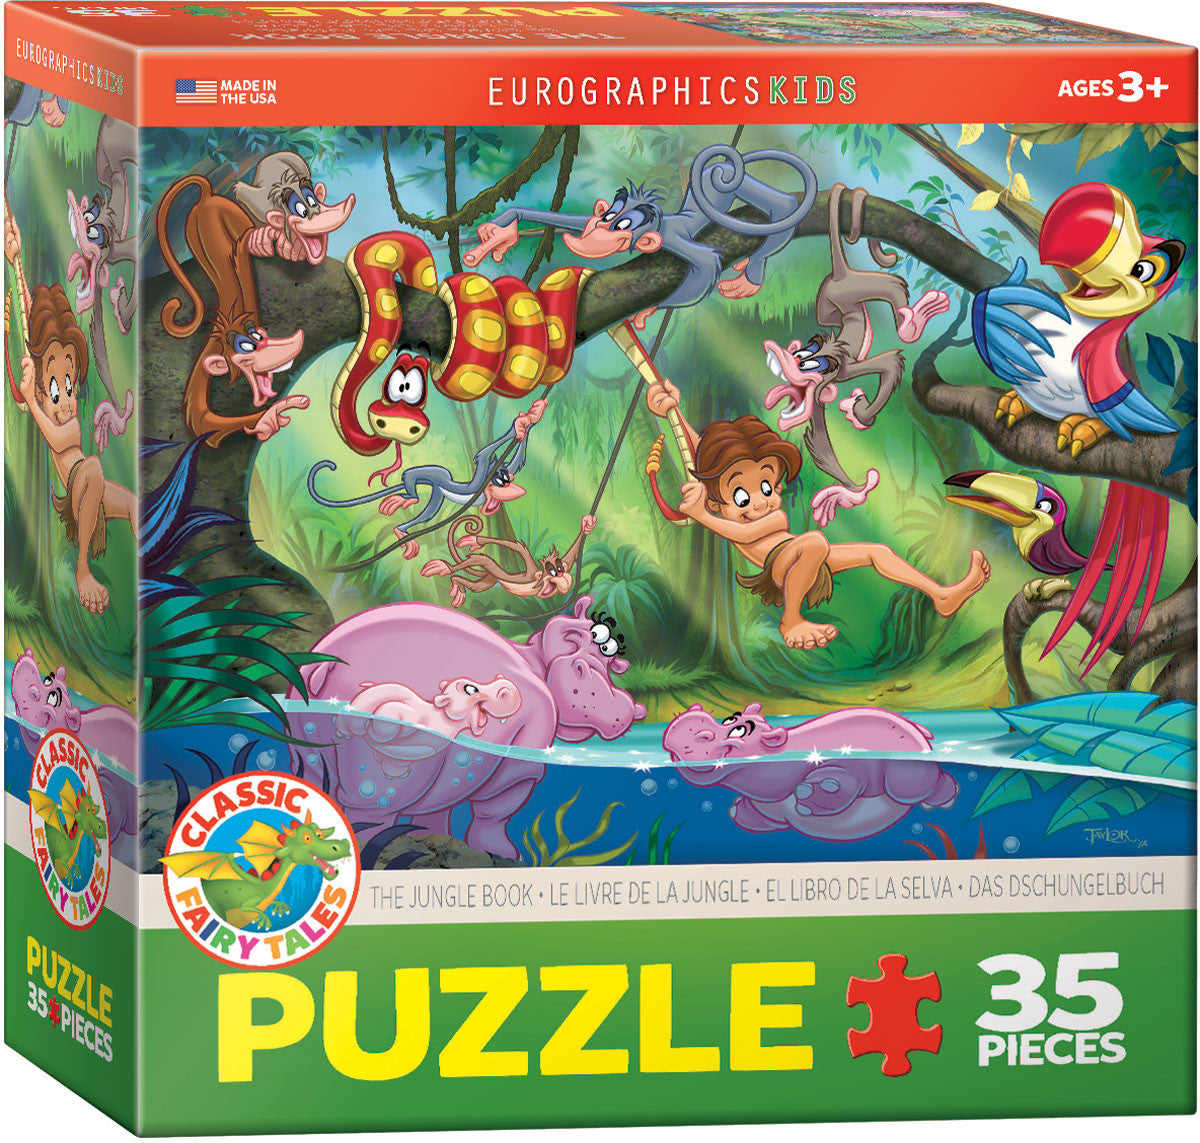 EuroGraphics Puzzles The Jungle Book